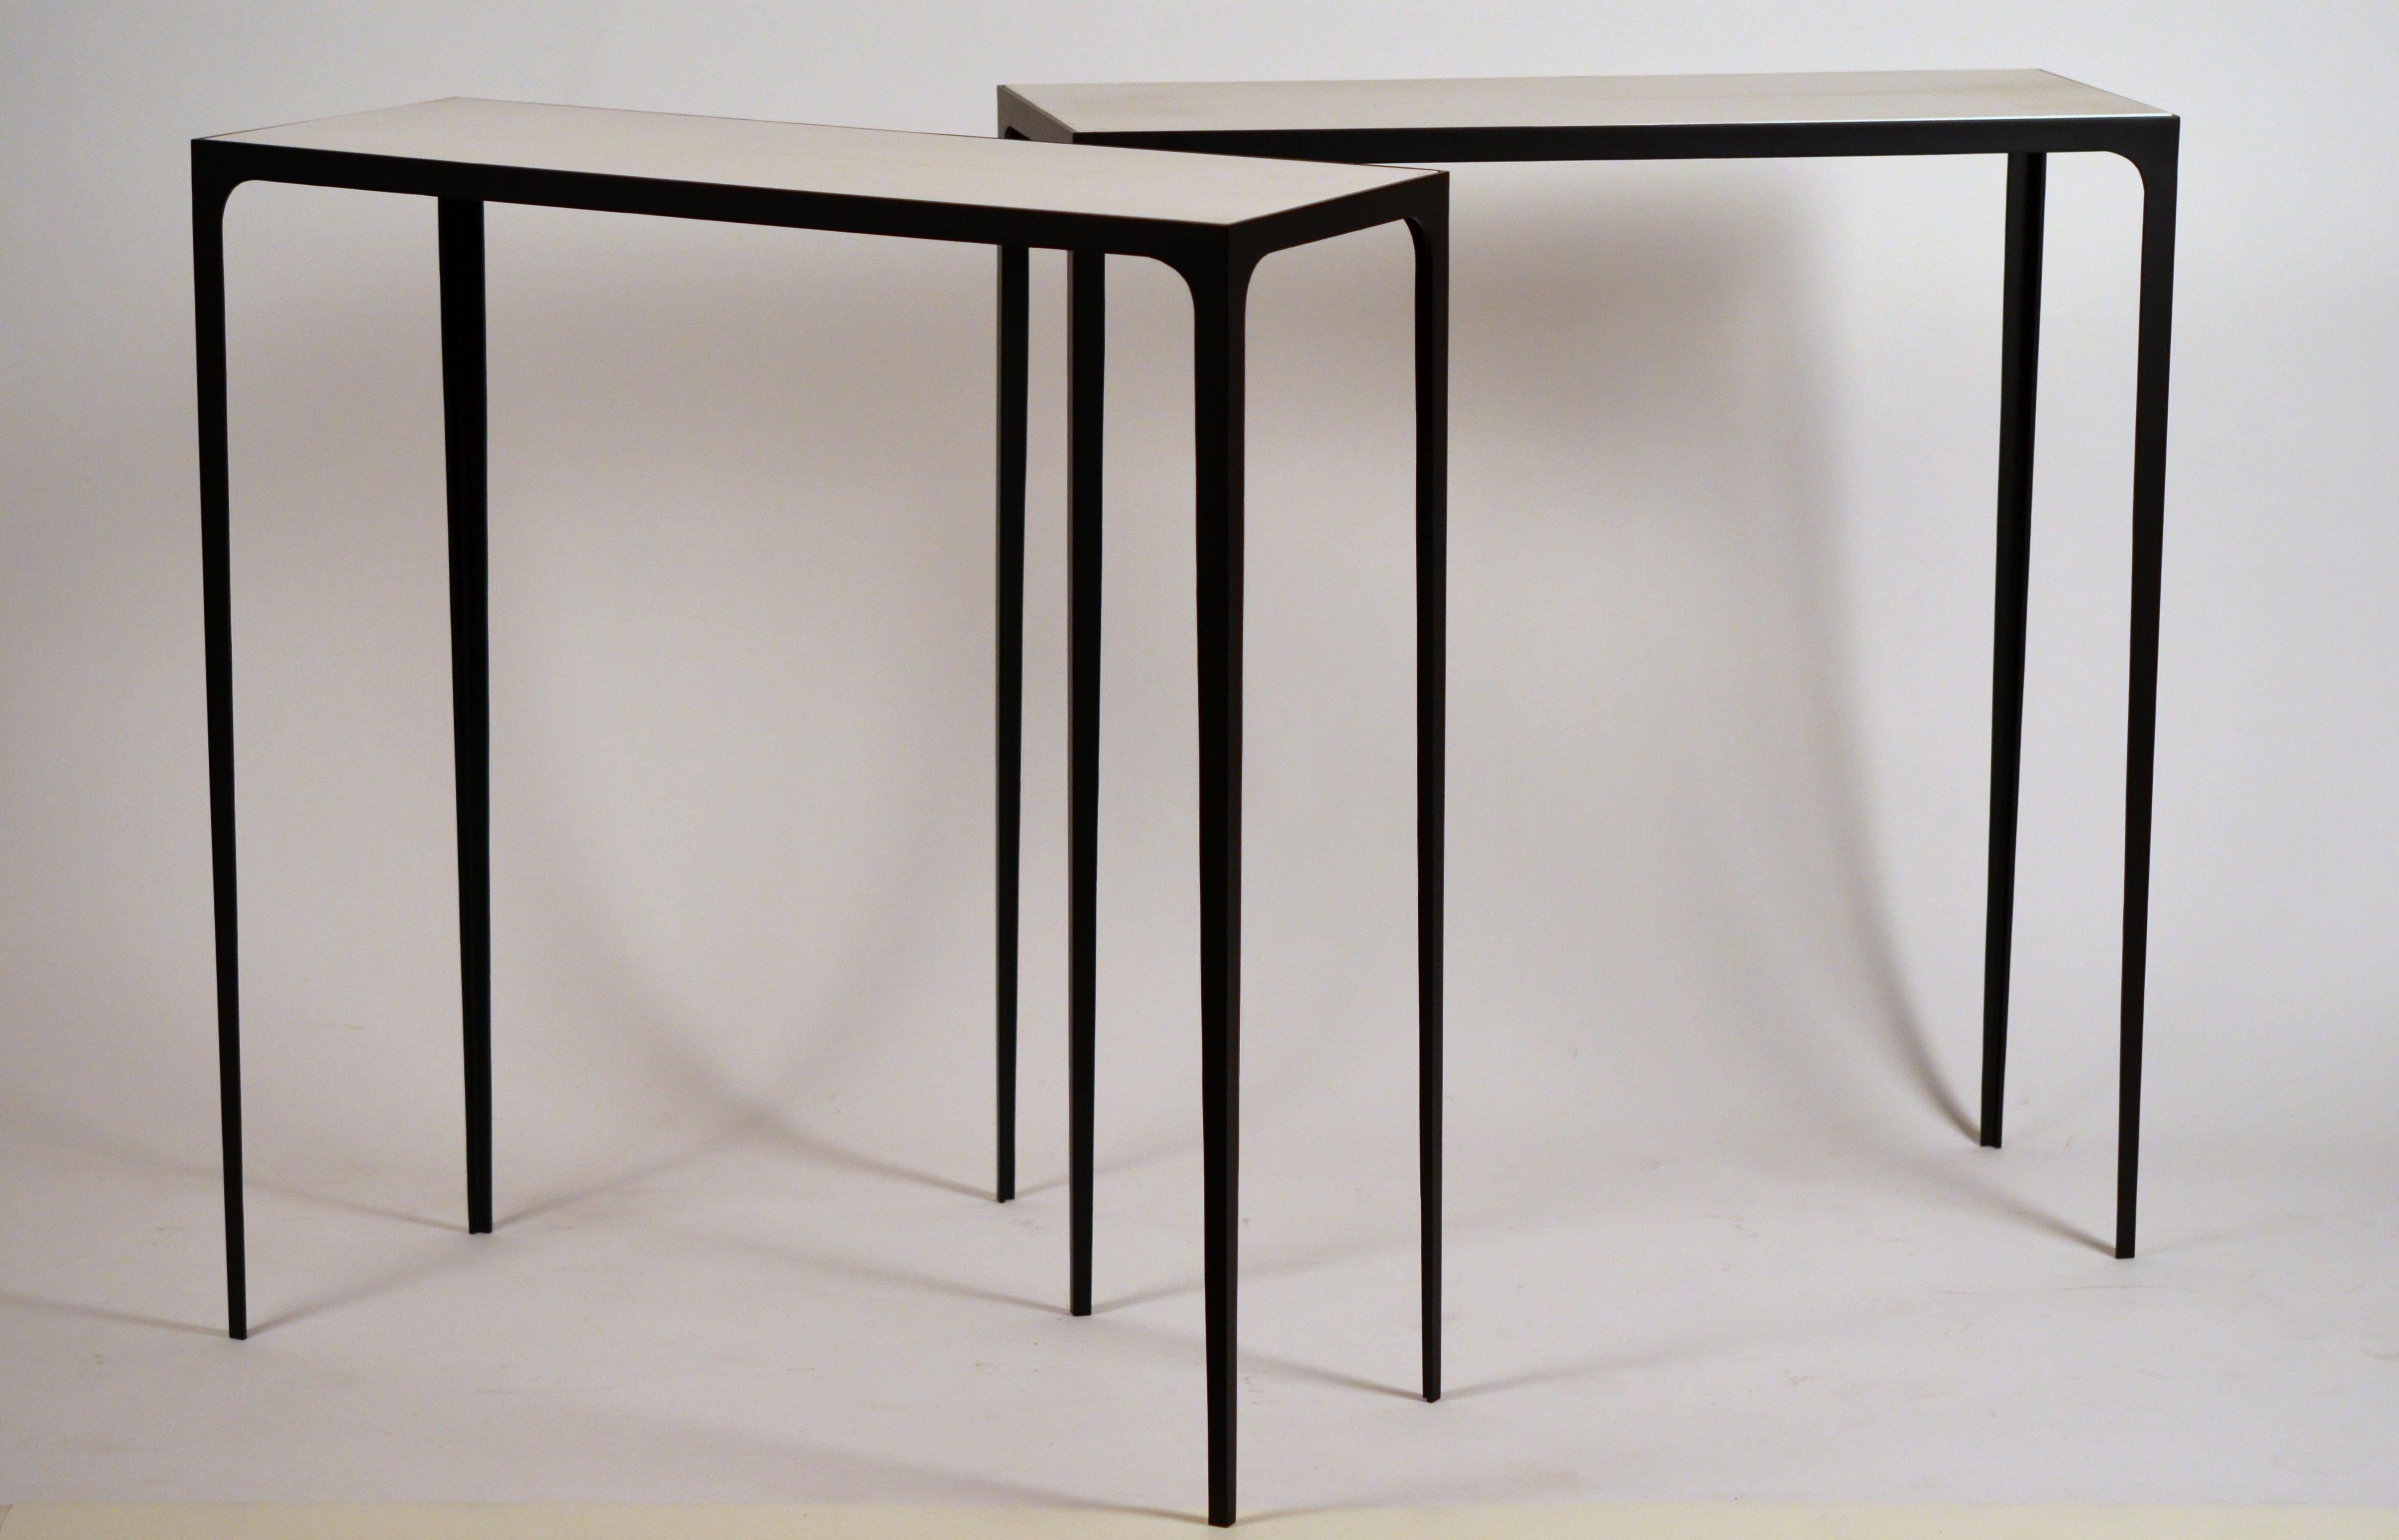 Pair of chic 'Esquisse' wrought iron and parchment consoles by Design Frères.

Contrasting white/cream goat parchment top over blackened slender steel base. Parchment is a natural material / each hide is different.

Beautifully simple, understated